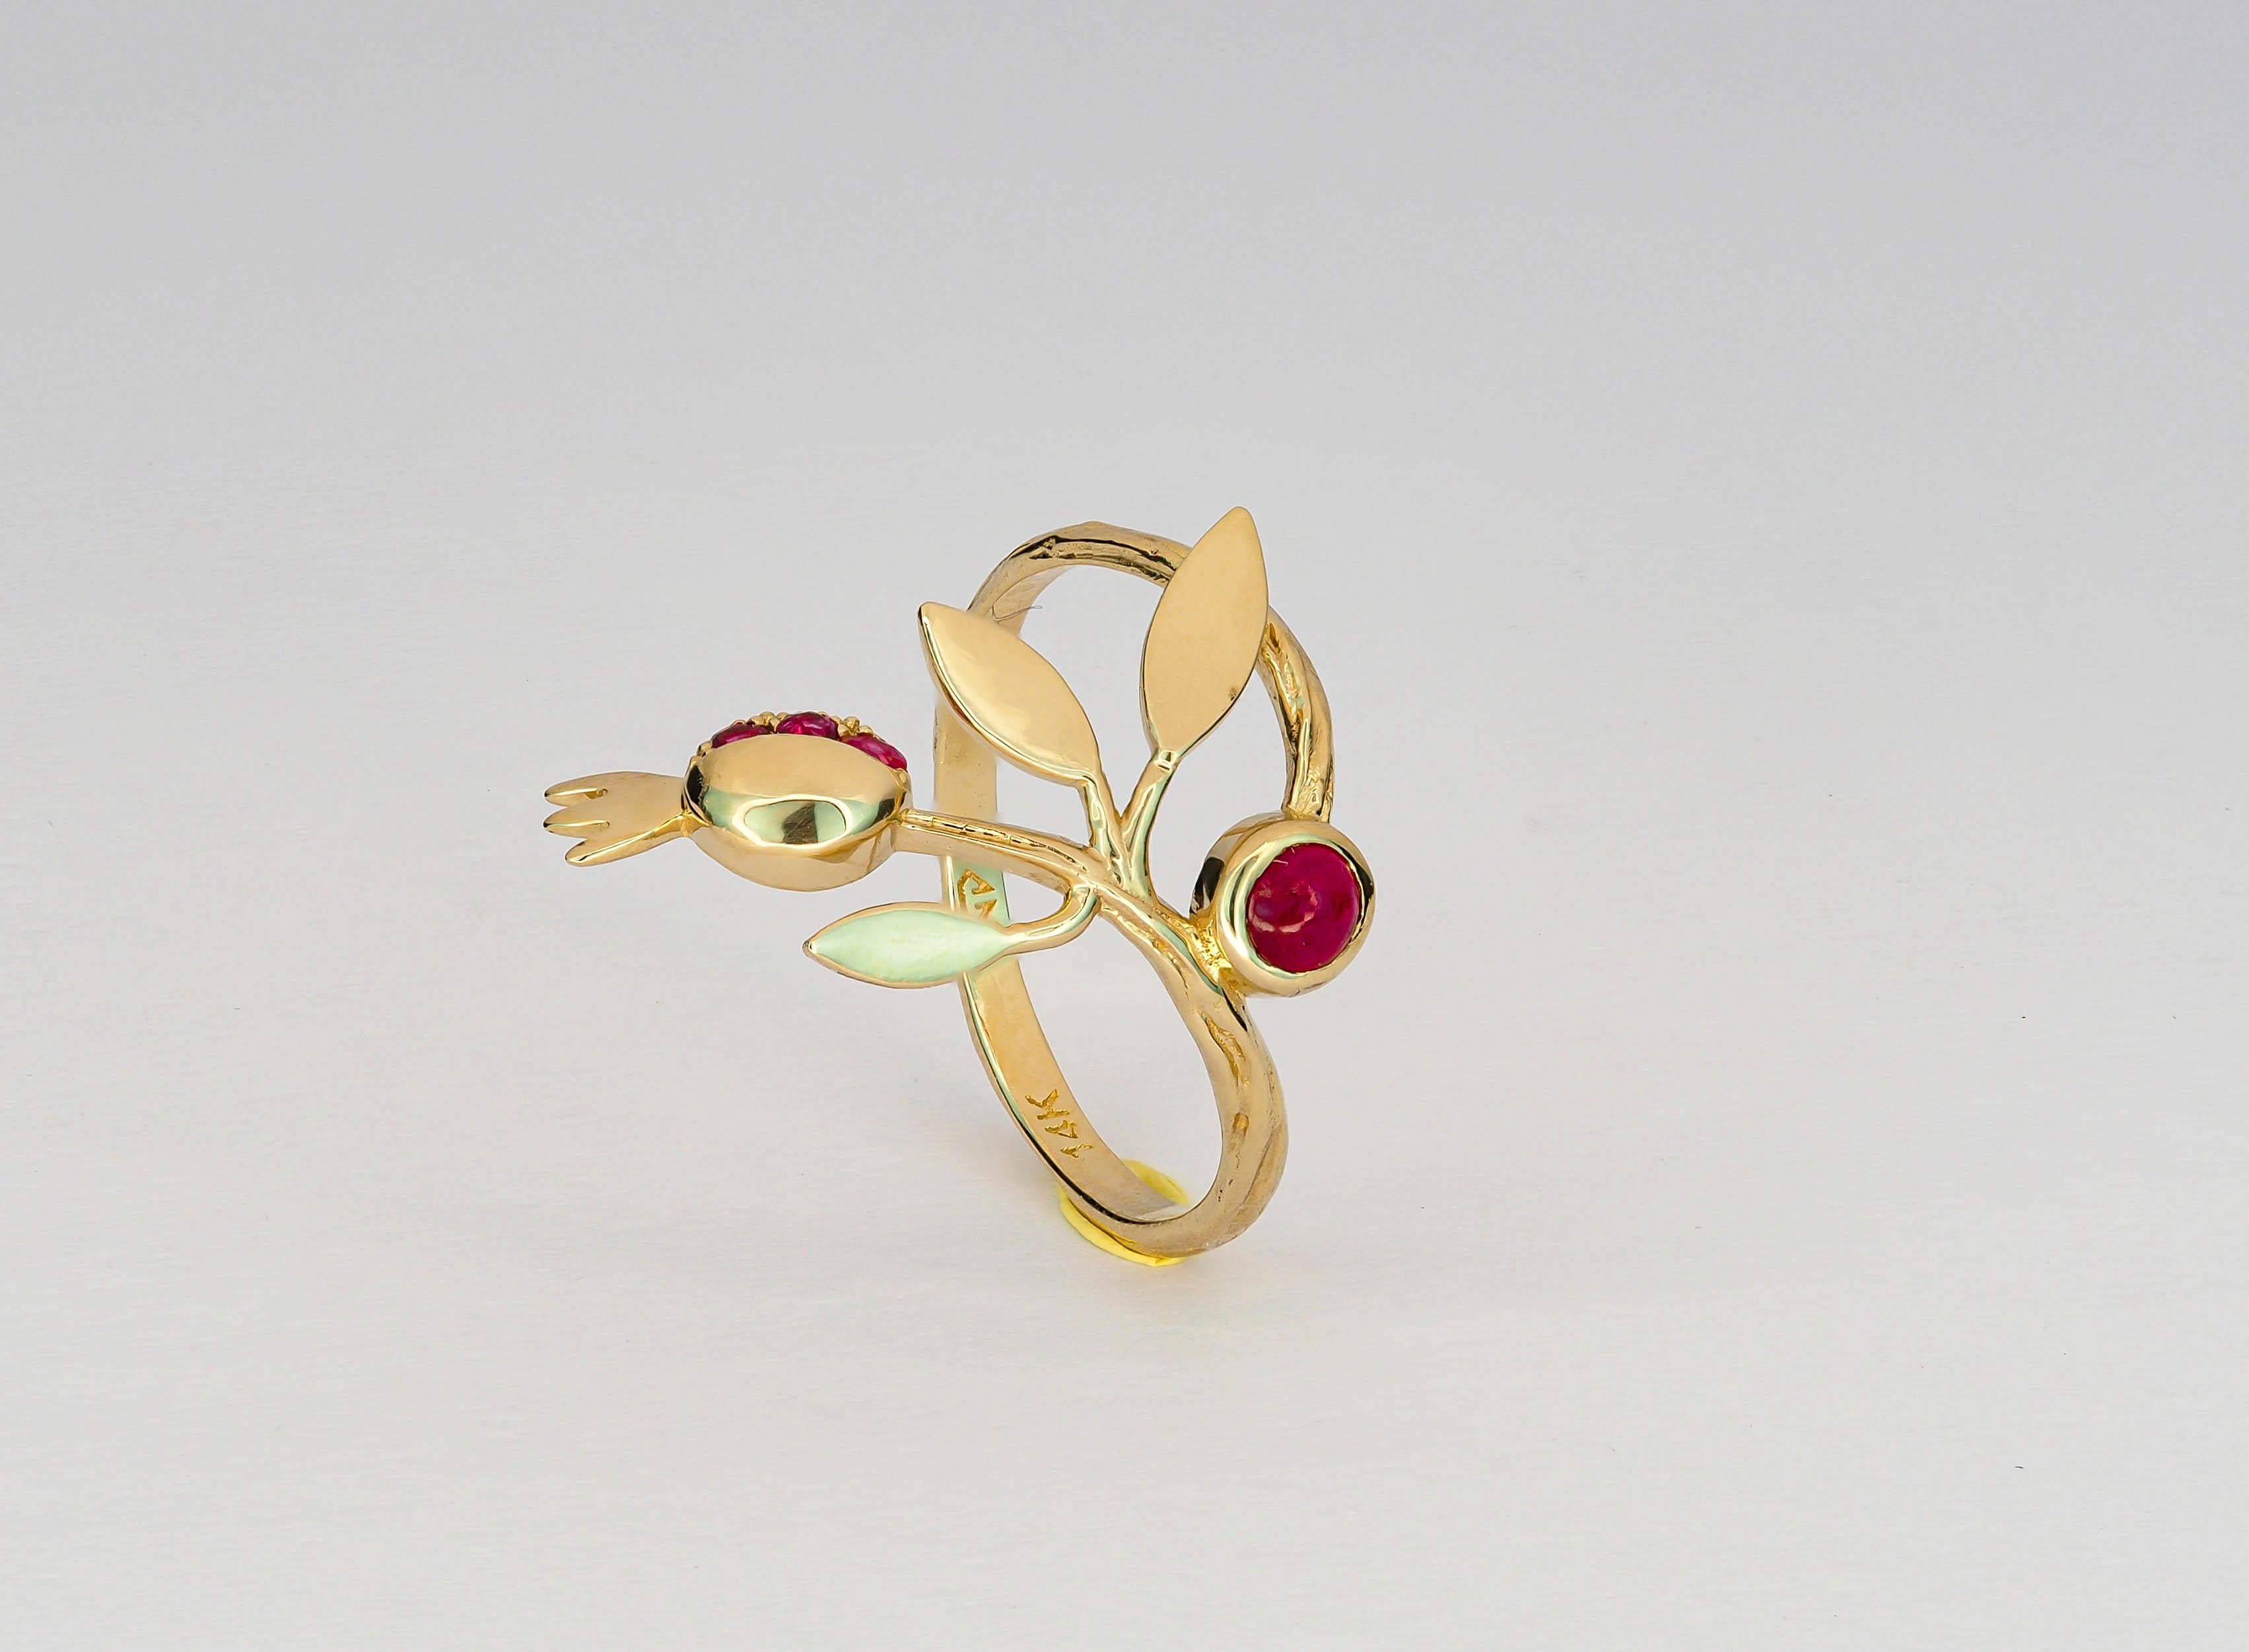 For Sale:  14 karat Gold Ring with Ruby, Sapphires. Pomegranate ring. July birthstone ring! 7